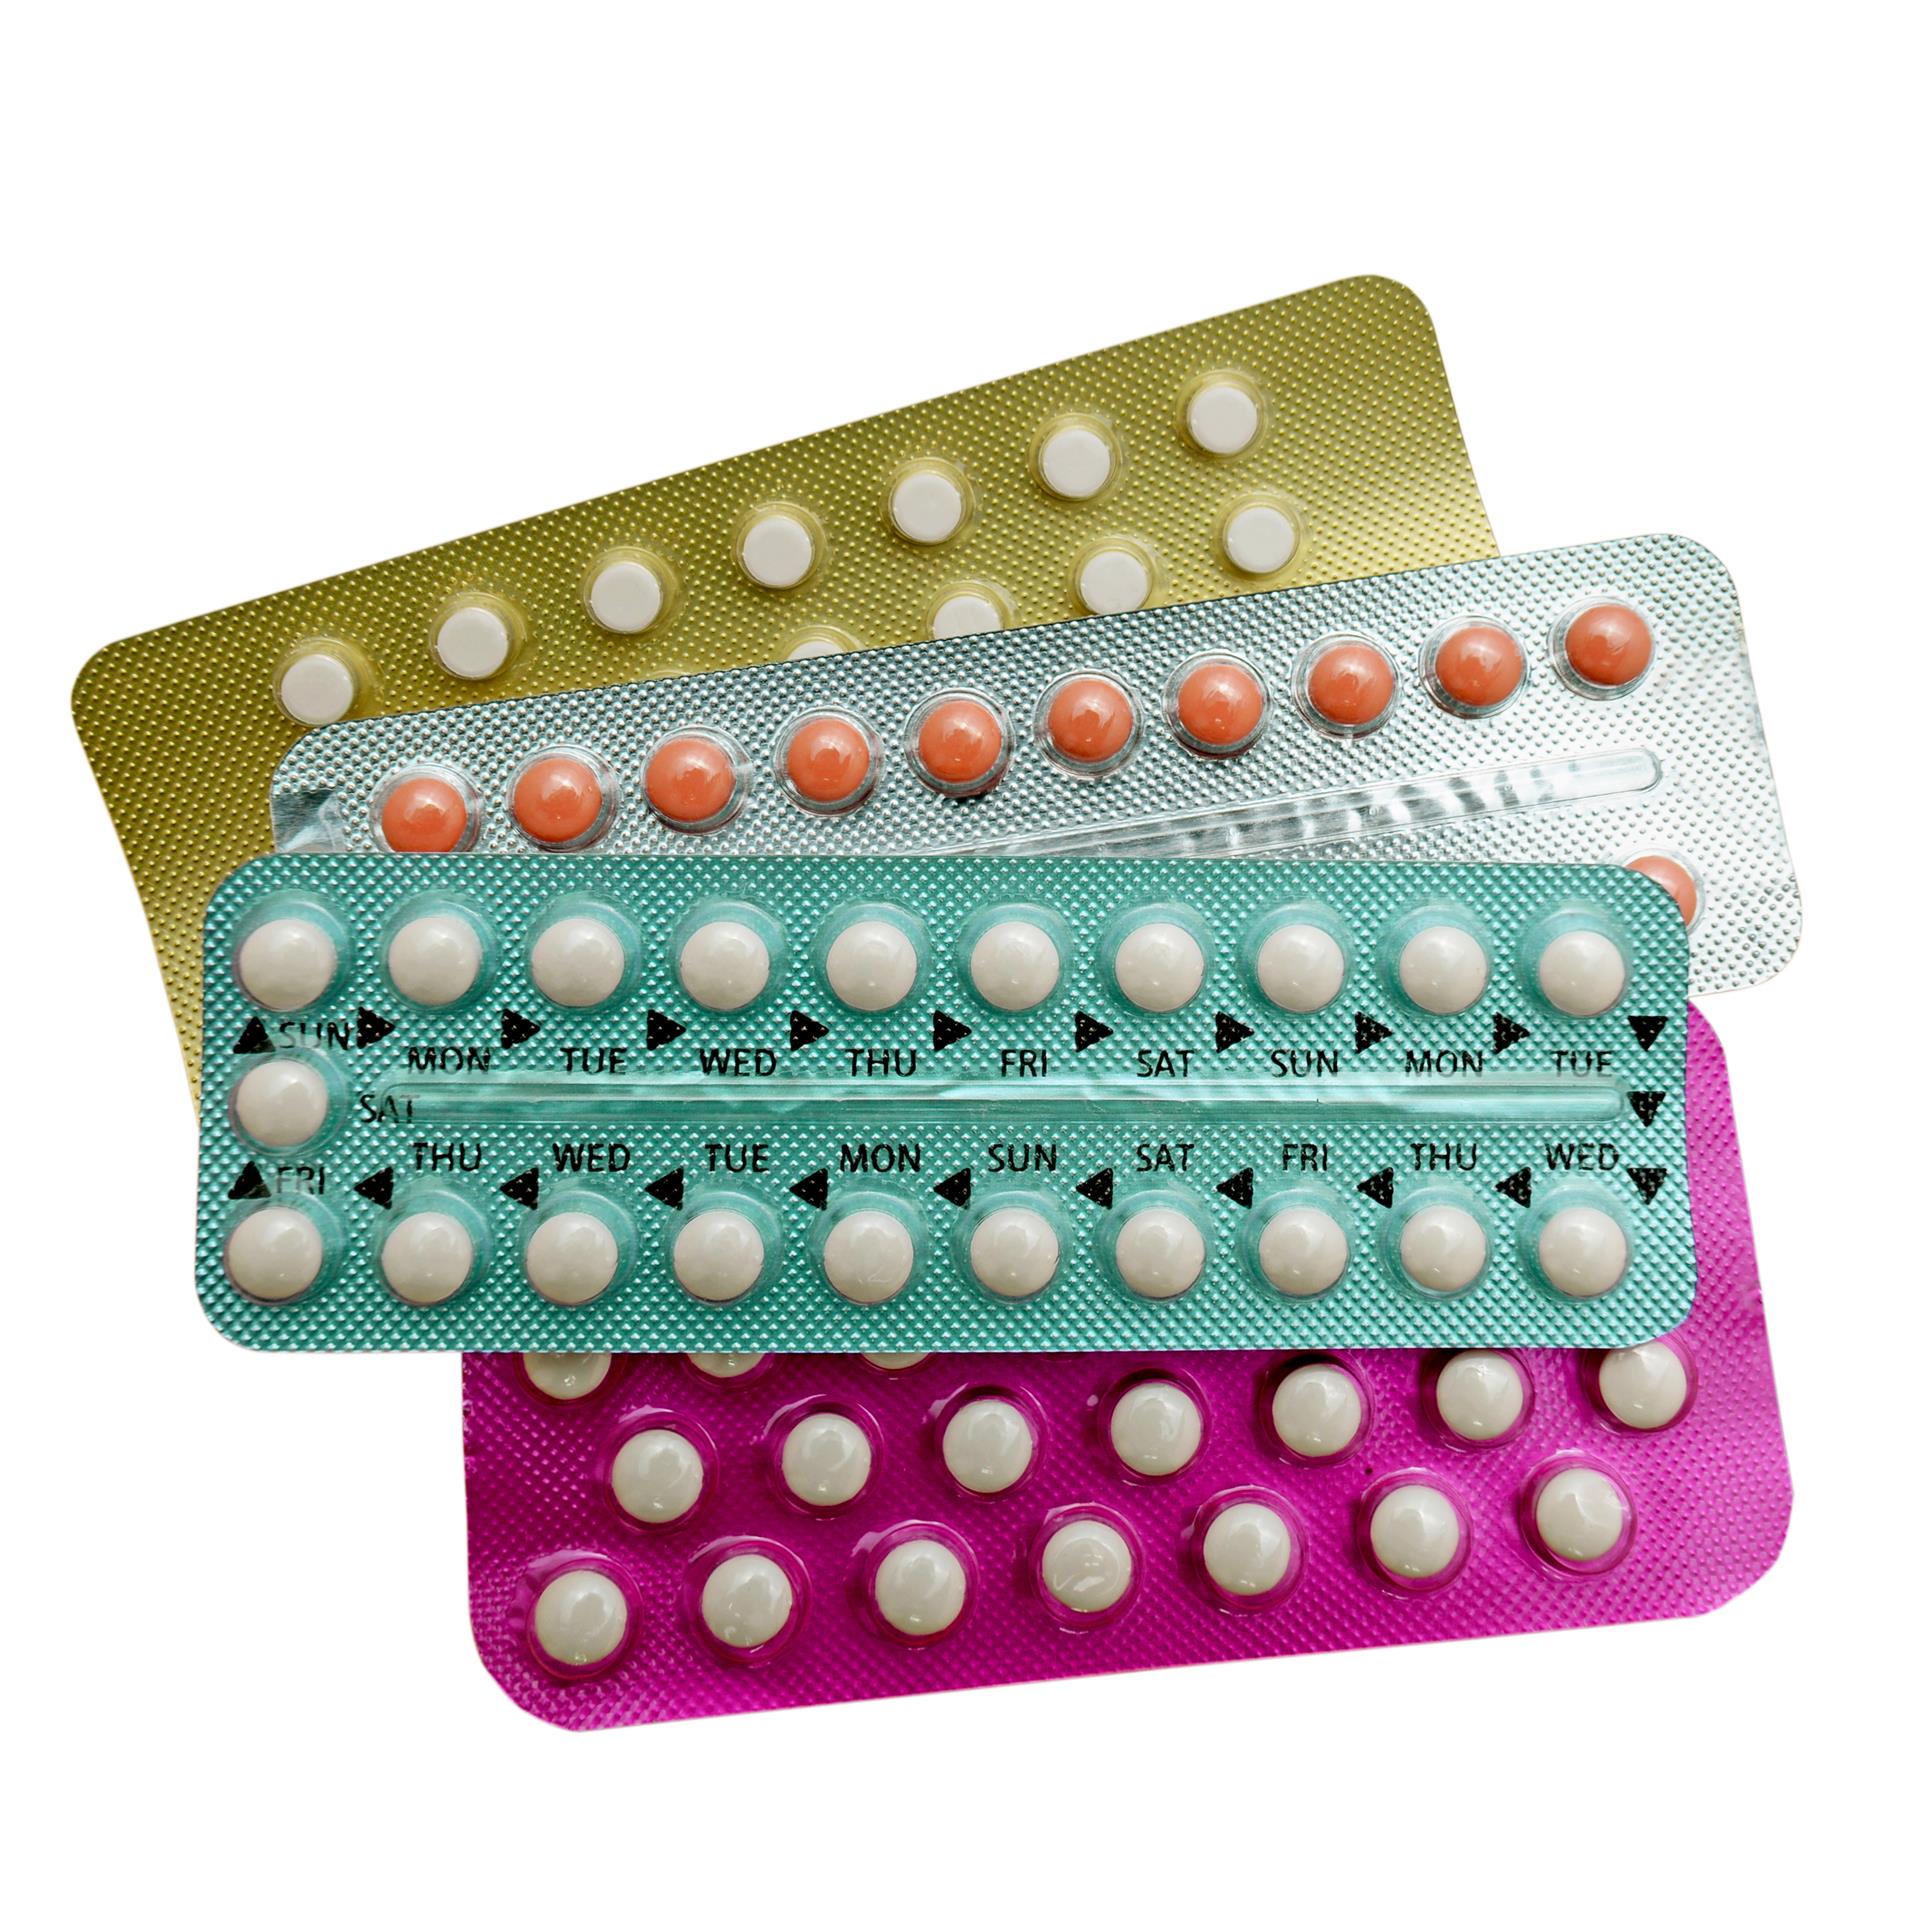 Contraceptive pill | Get the Facts